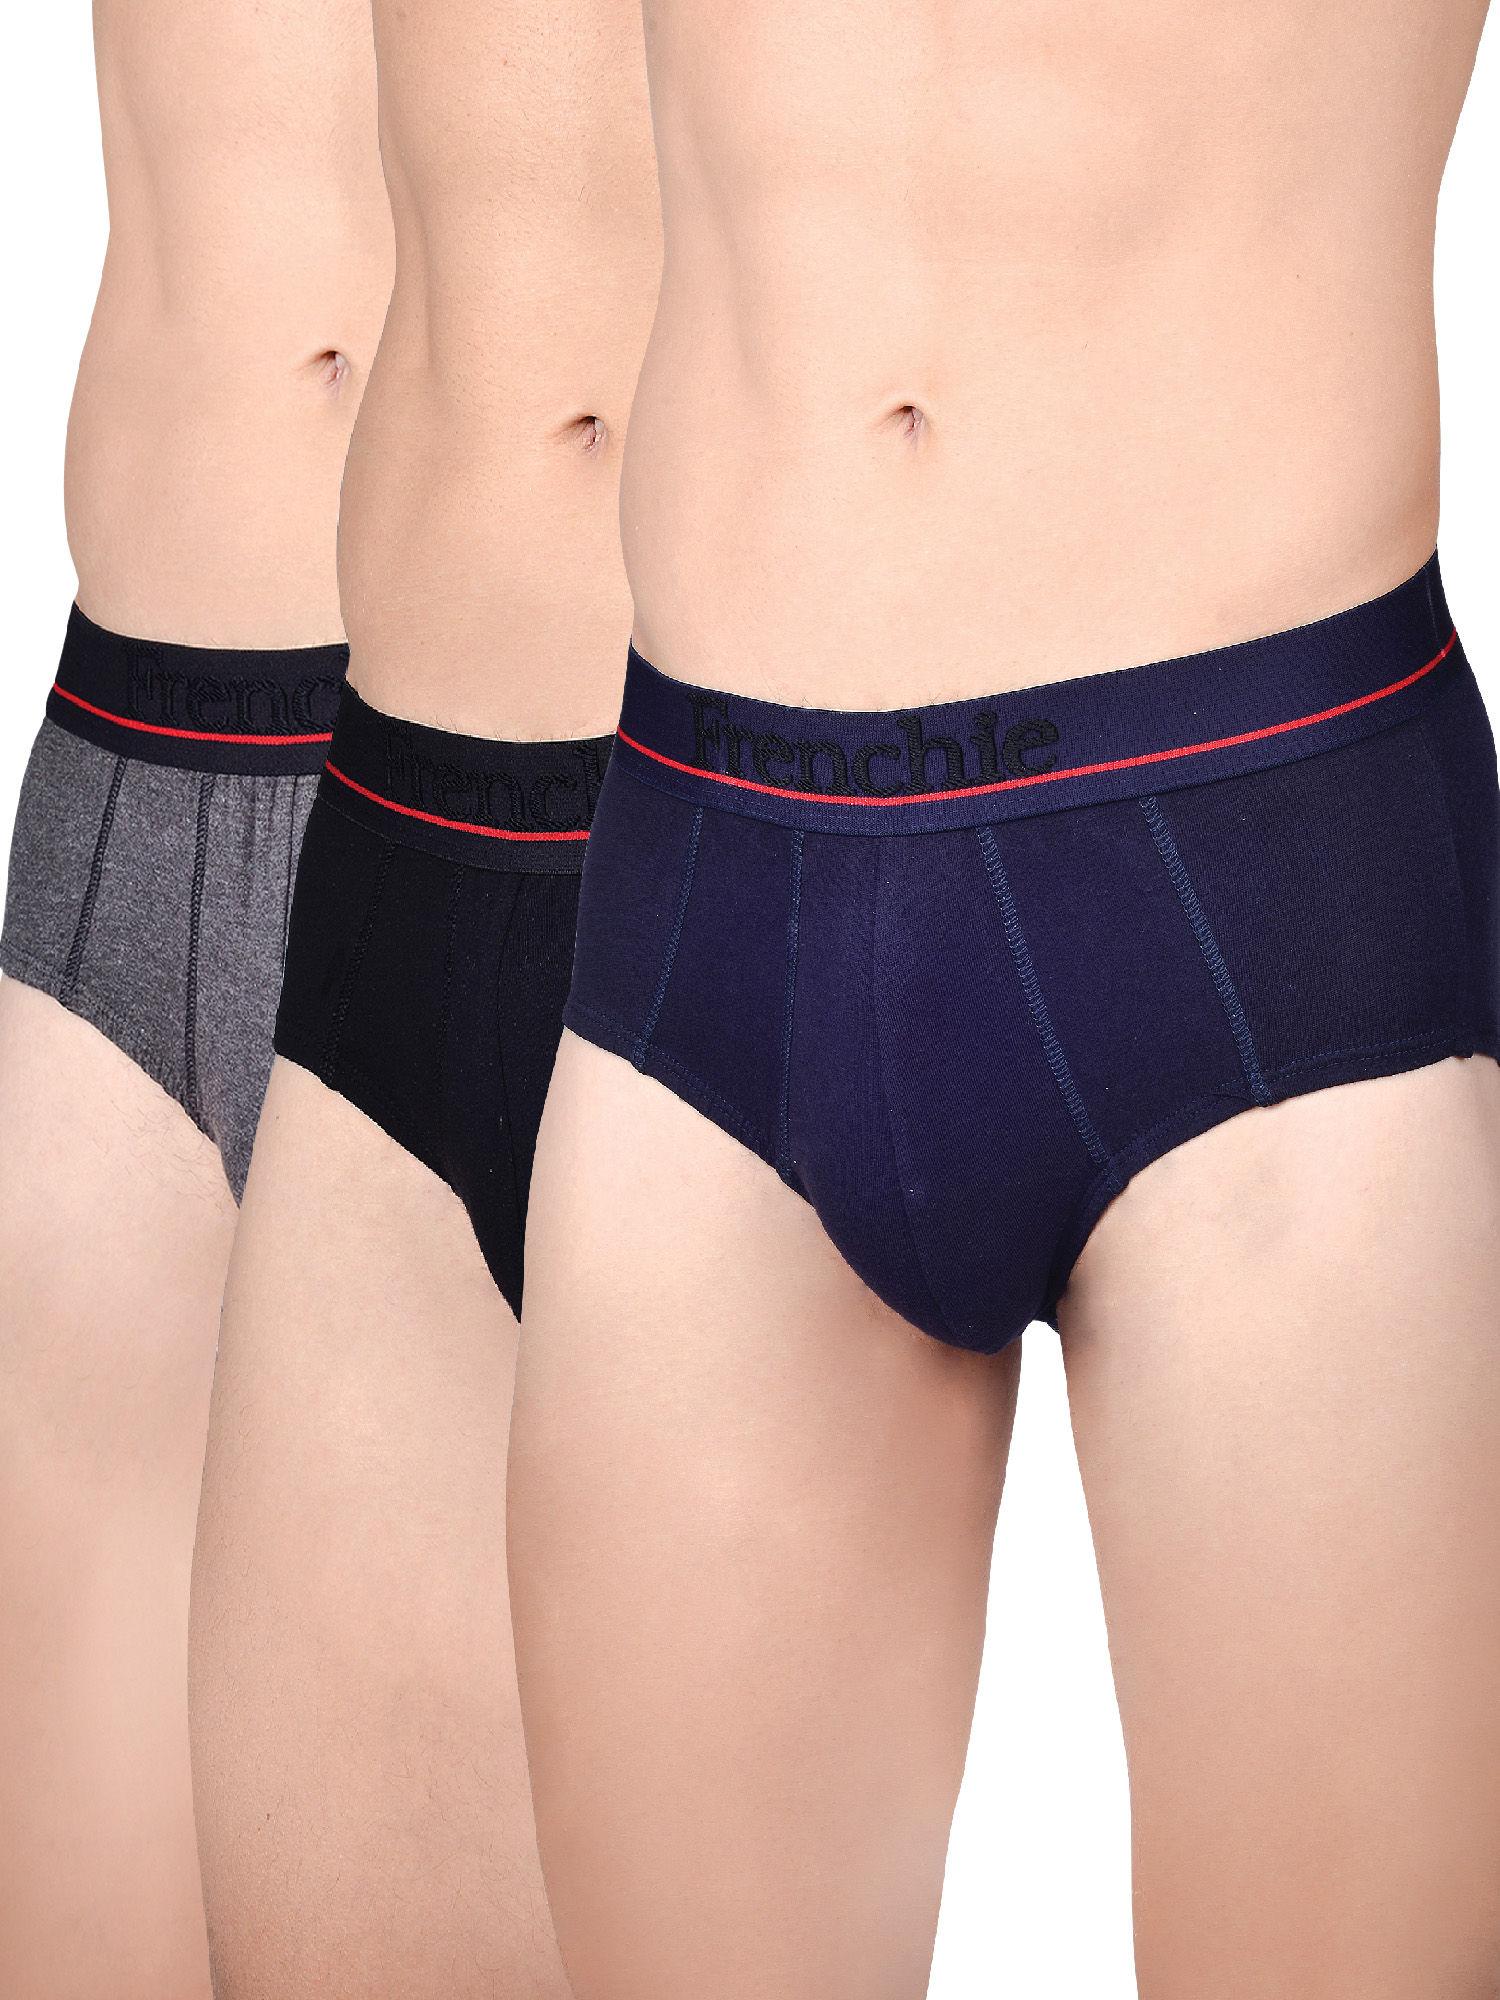 casuals-4003-mens-cotton-briefs-assorted-colours-(pack-of-3)